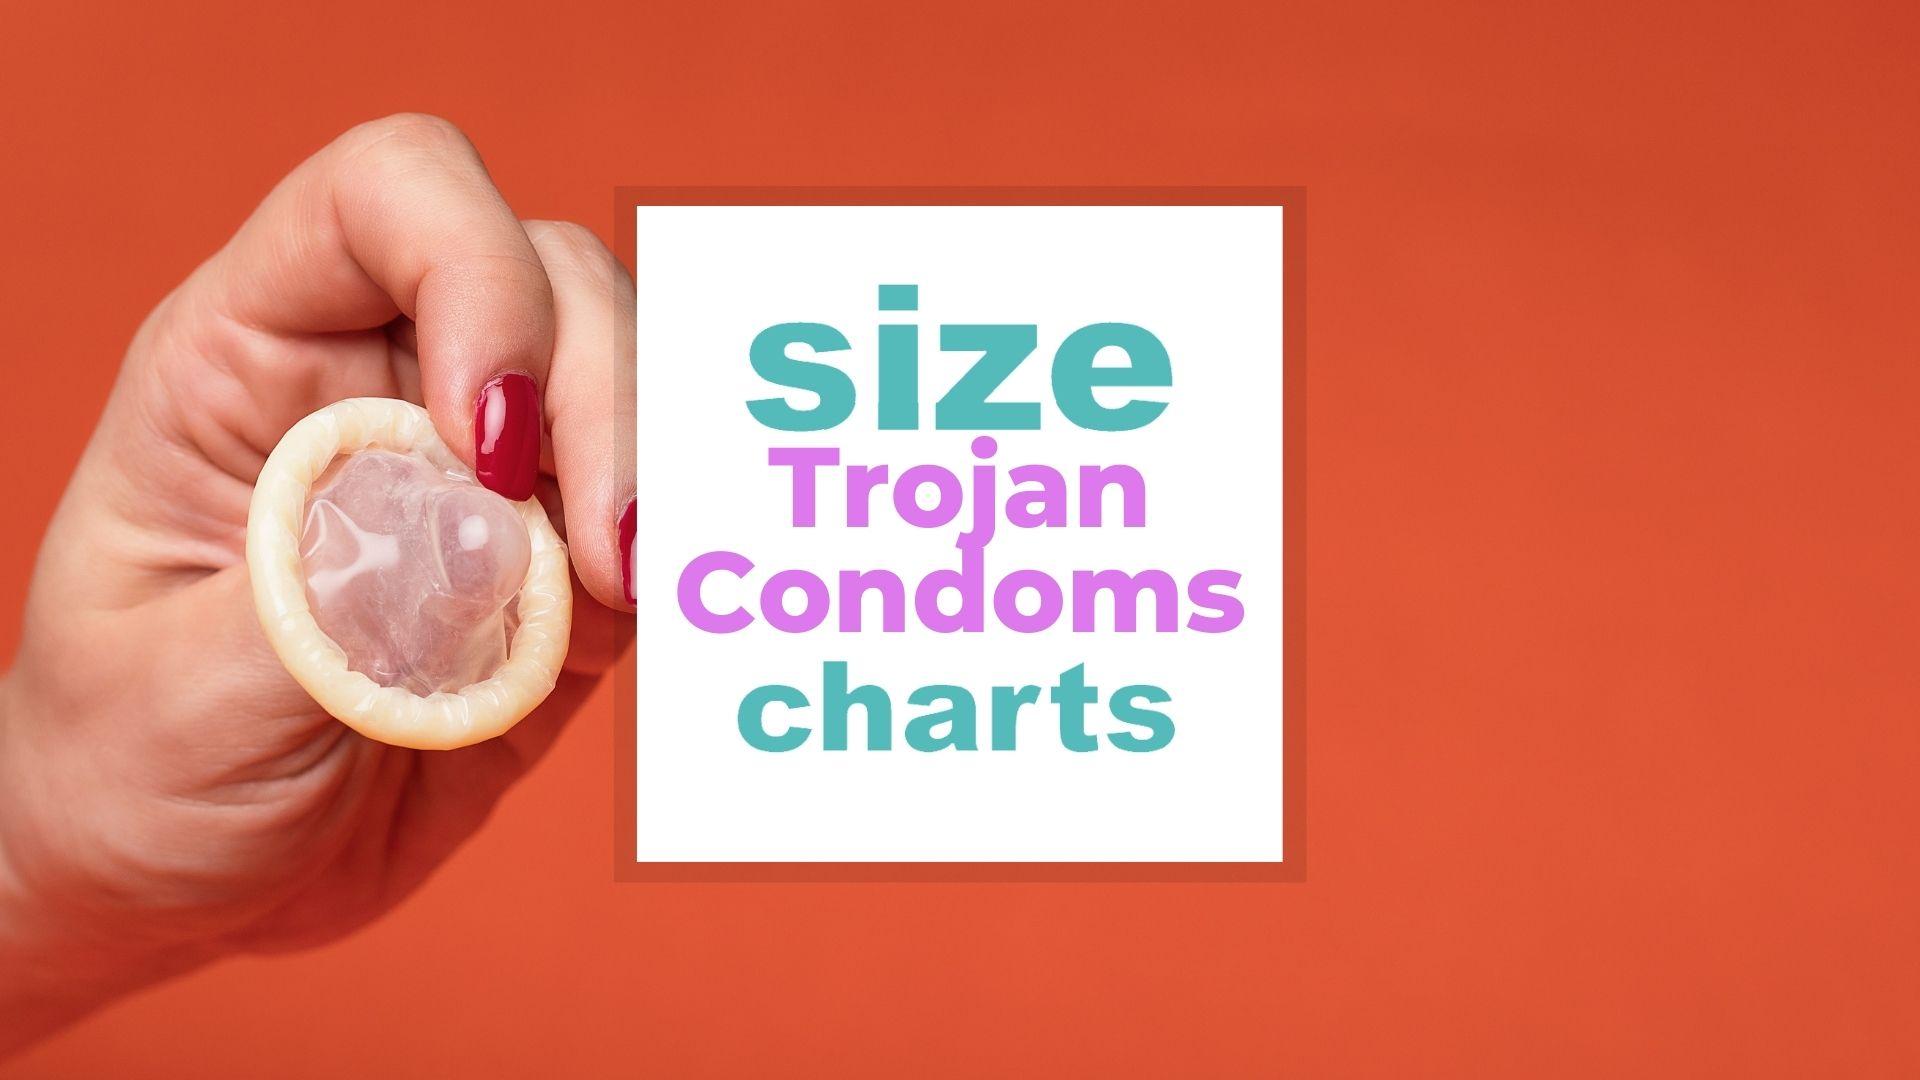 Trojan Condoms Size Chart For Each Size and Need